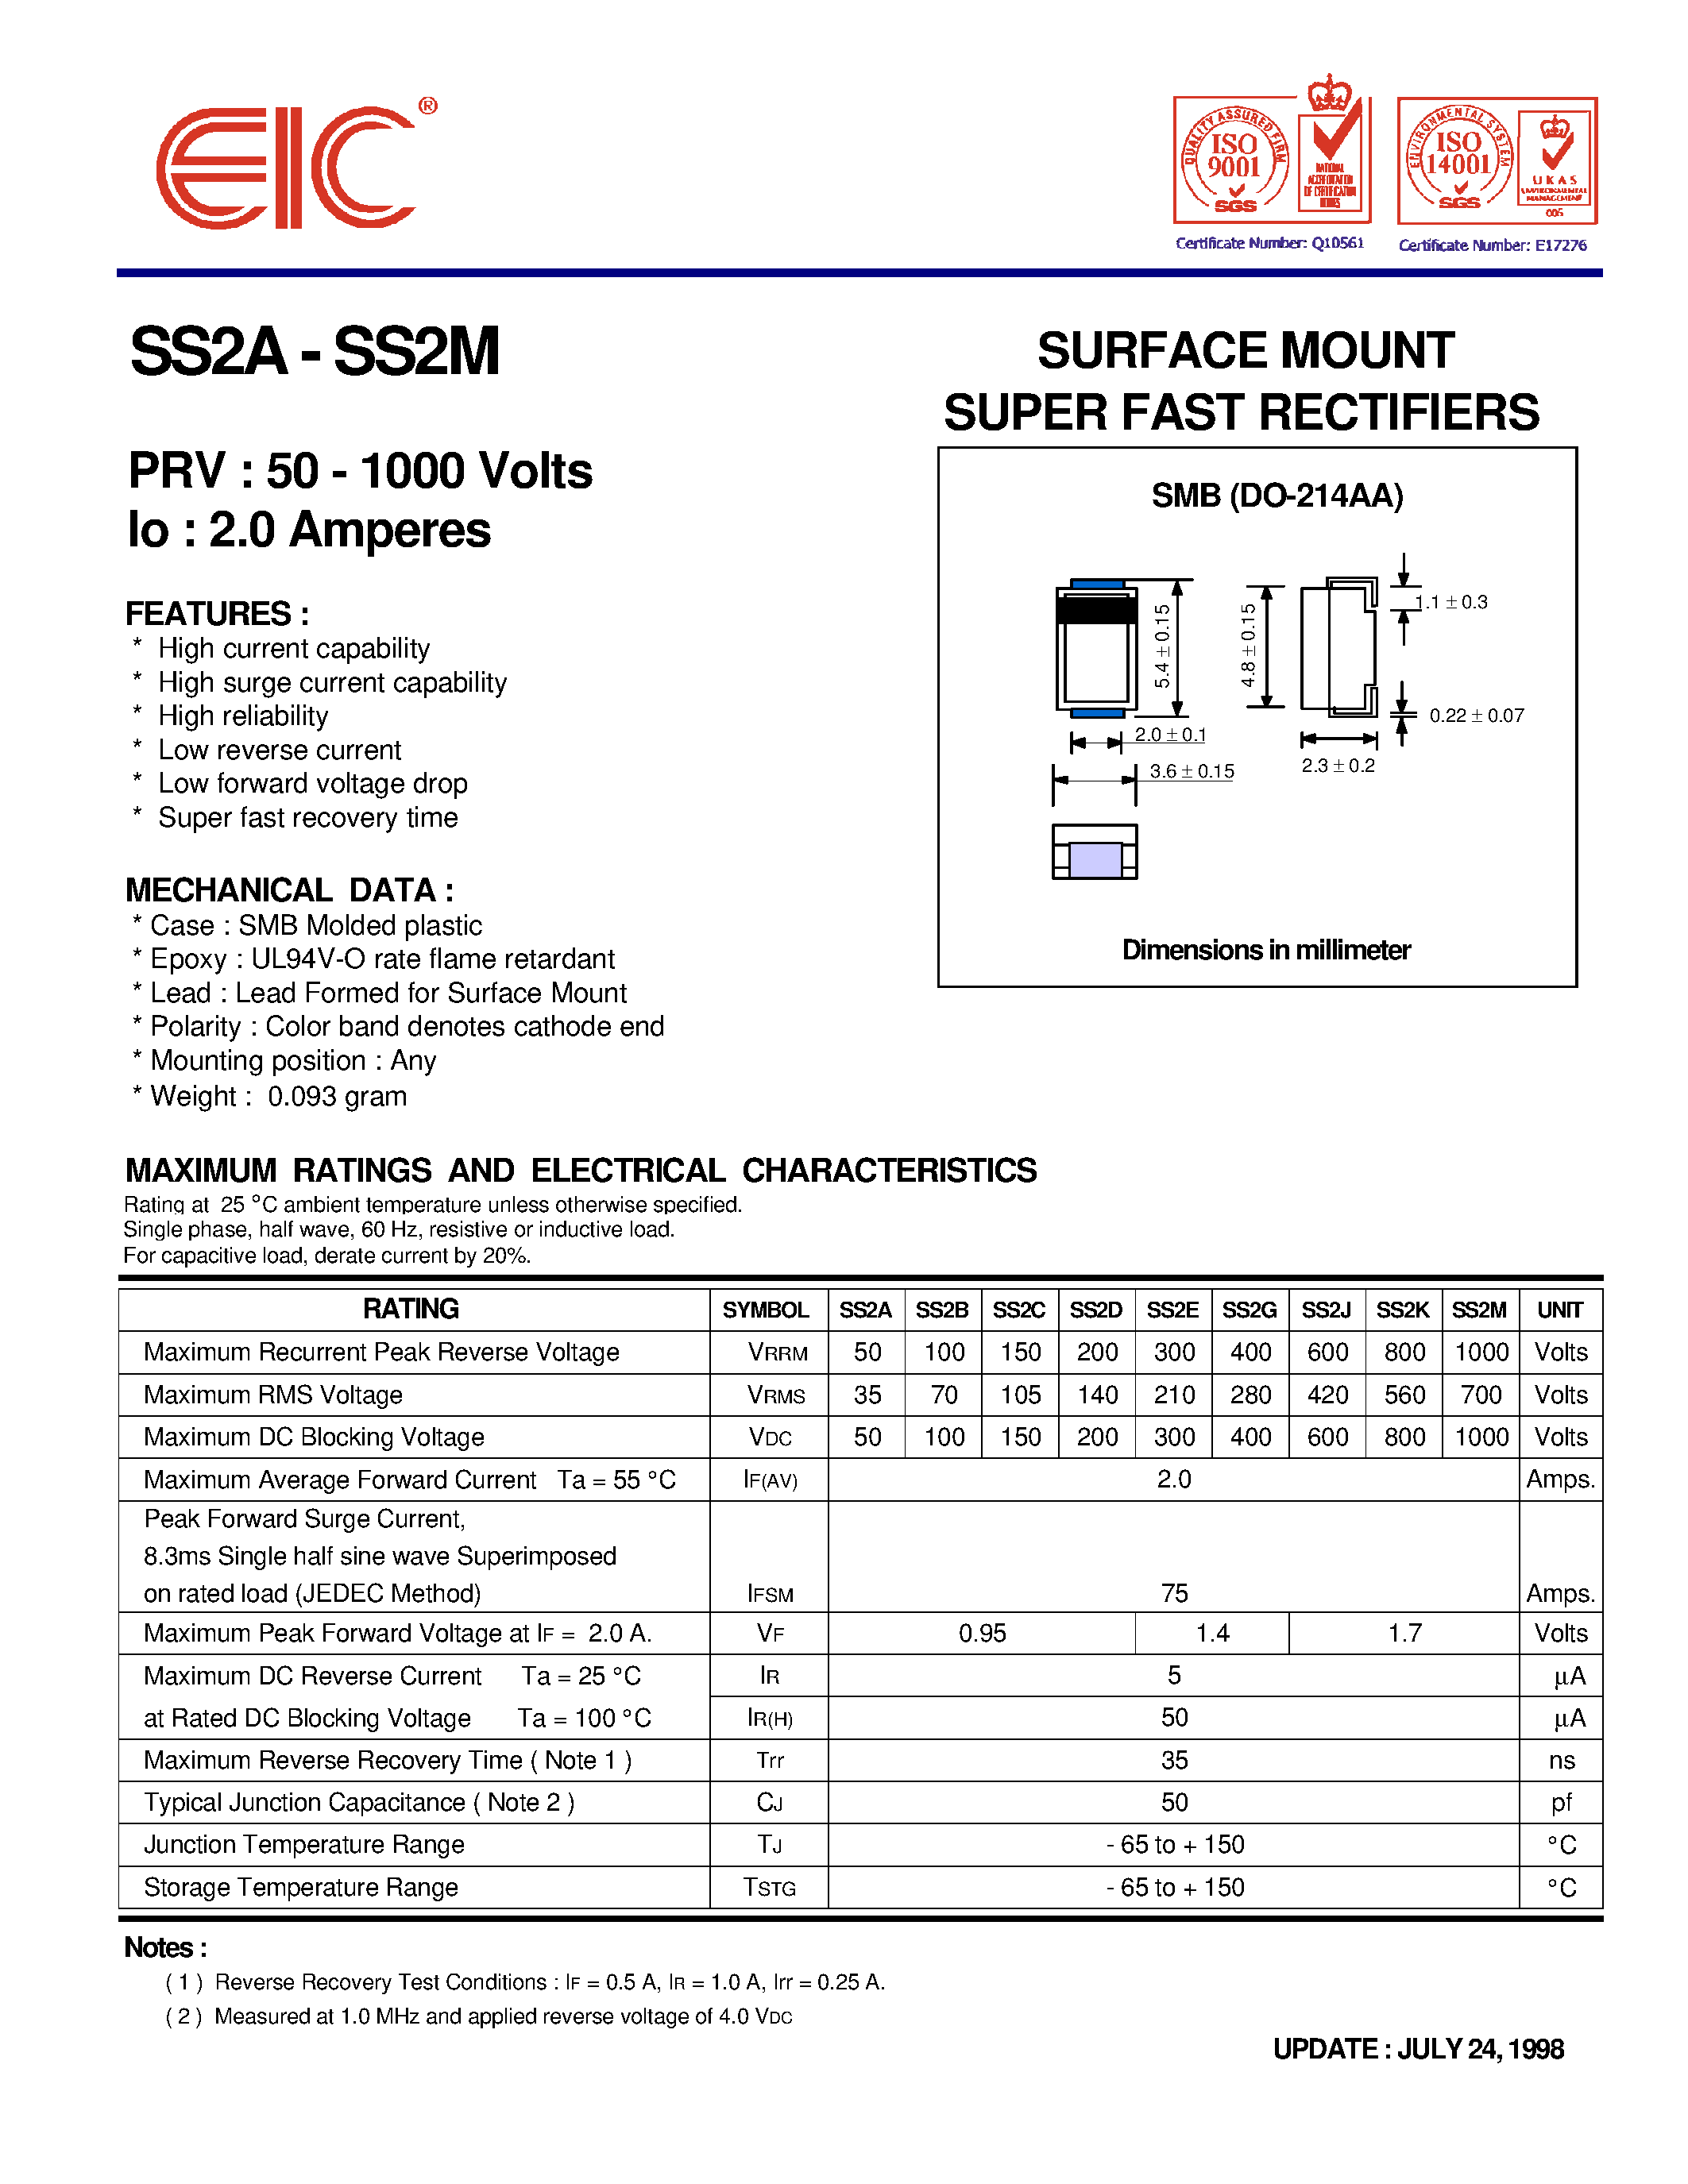 Datasheet SS2B - SURFACE MOUNT SUPER FAST RECTIFIERS page 1